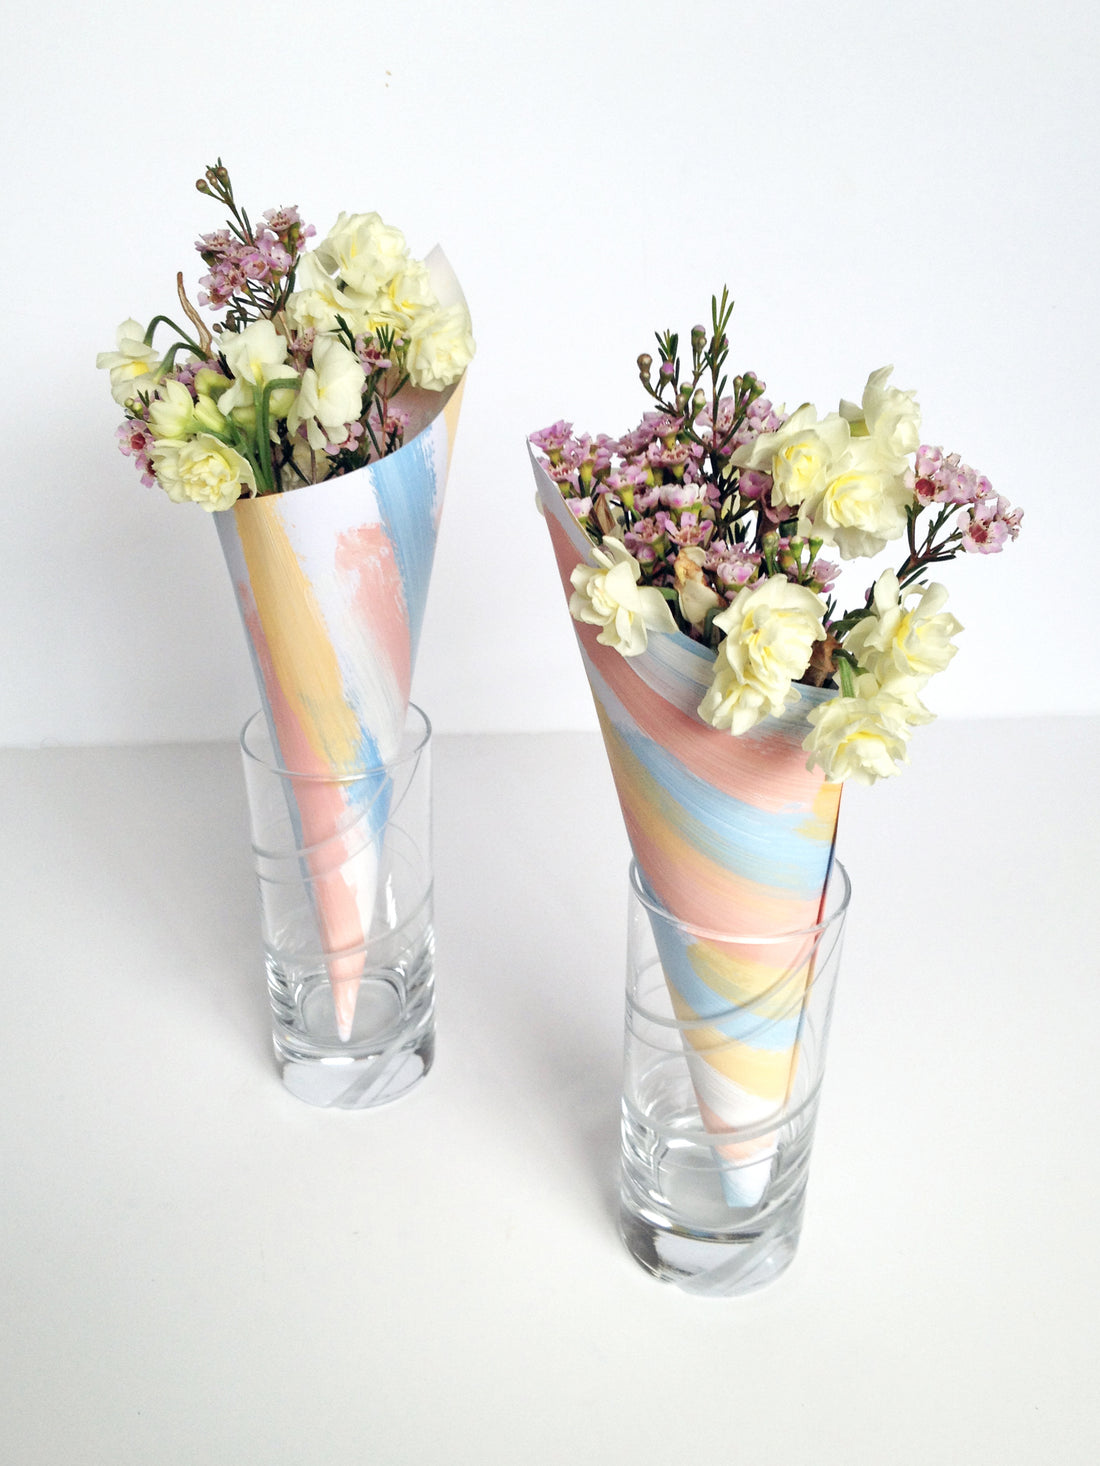 DIY painted flower cones for Simply Peachy